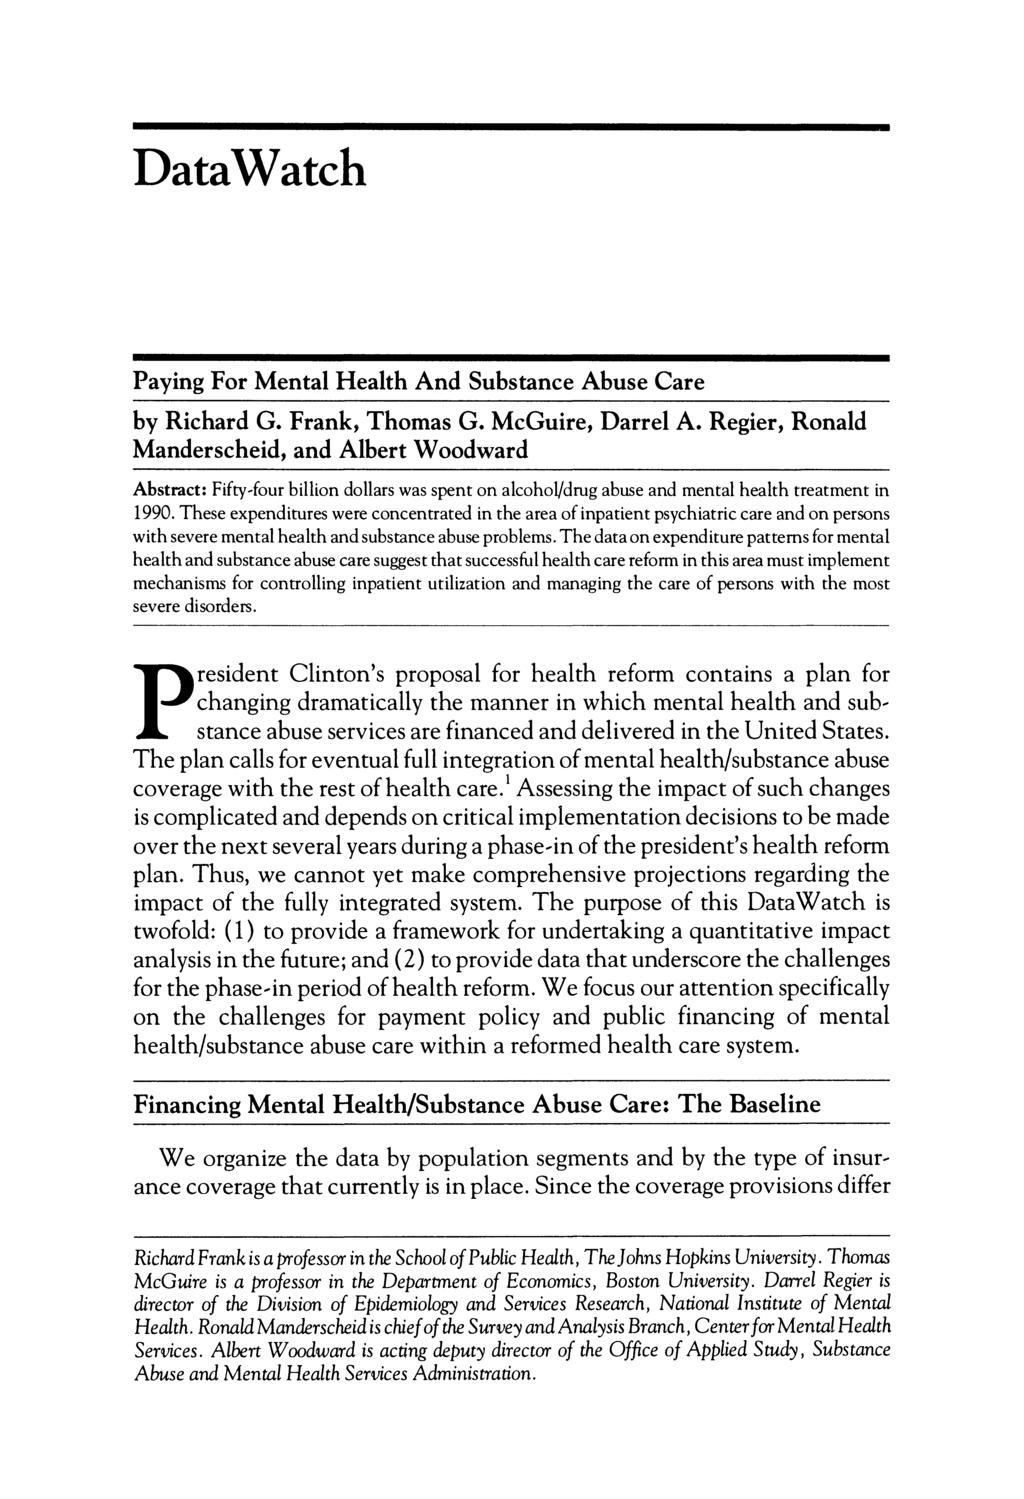 DataWatch Paying For Mental Health And Substance Abuse Care by Richard G. Frank, Thomas G.